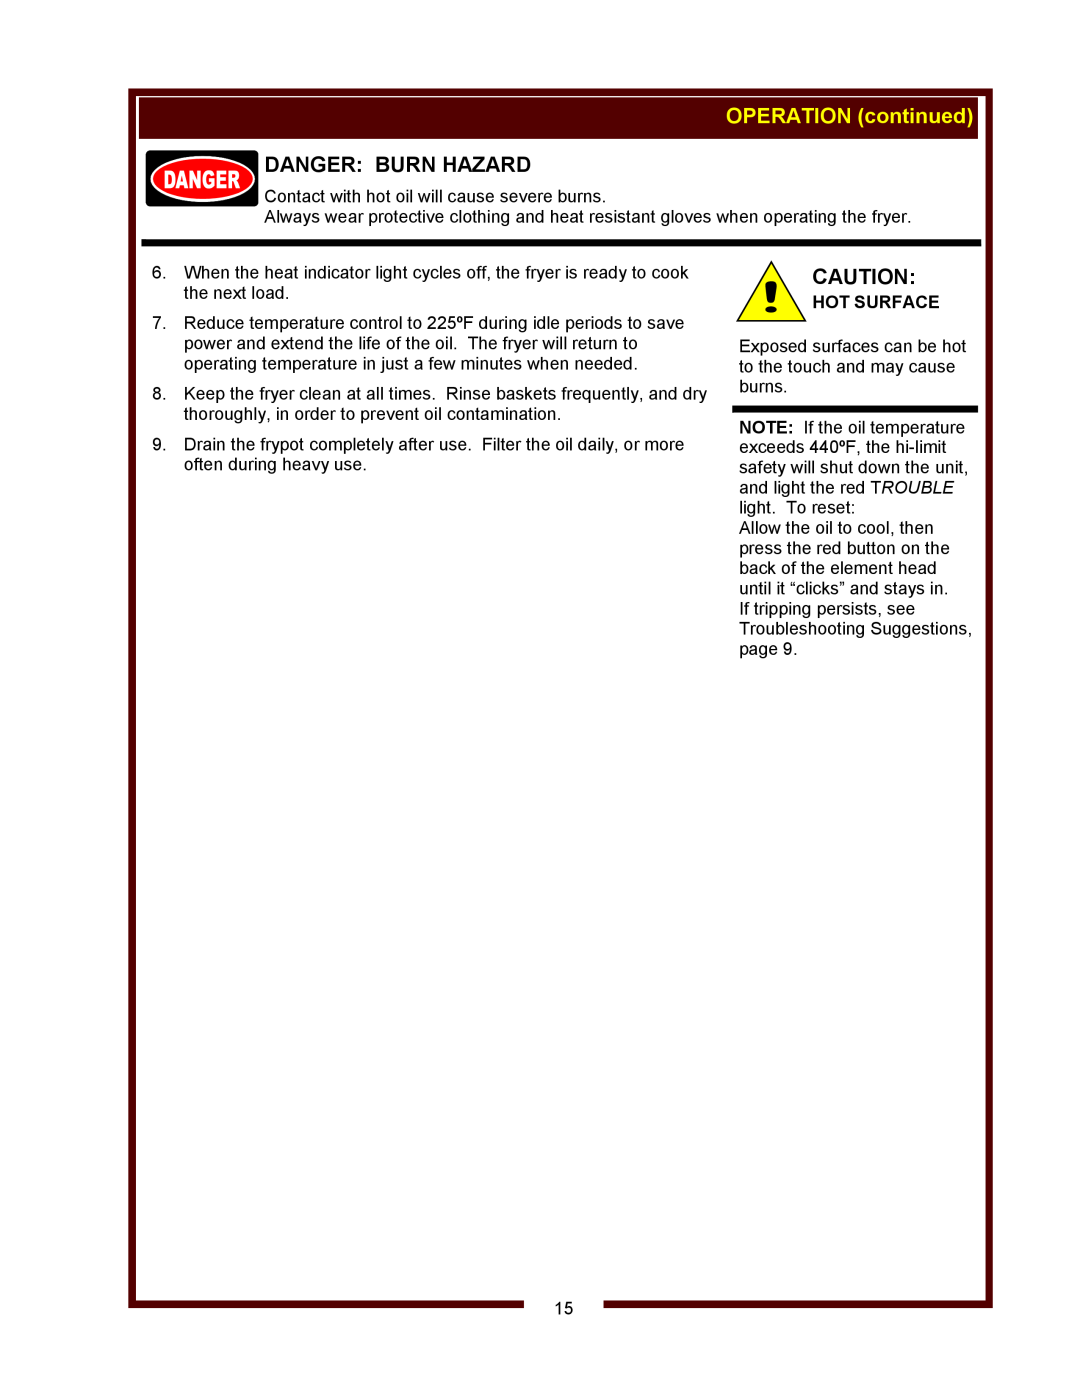 Wells WVF-886 operation manual OPERATION continued, Danger Burn Hazard, Hot Surface 